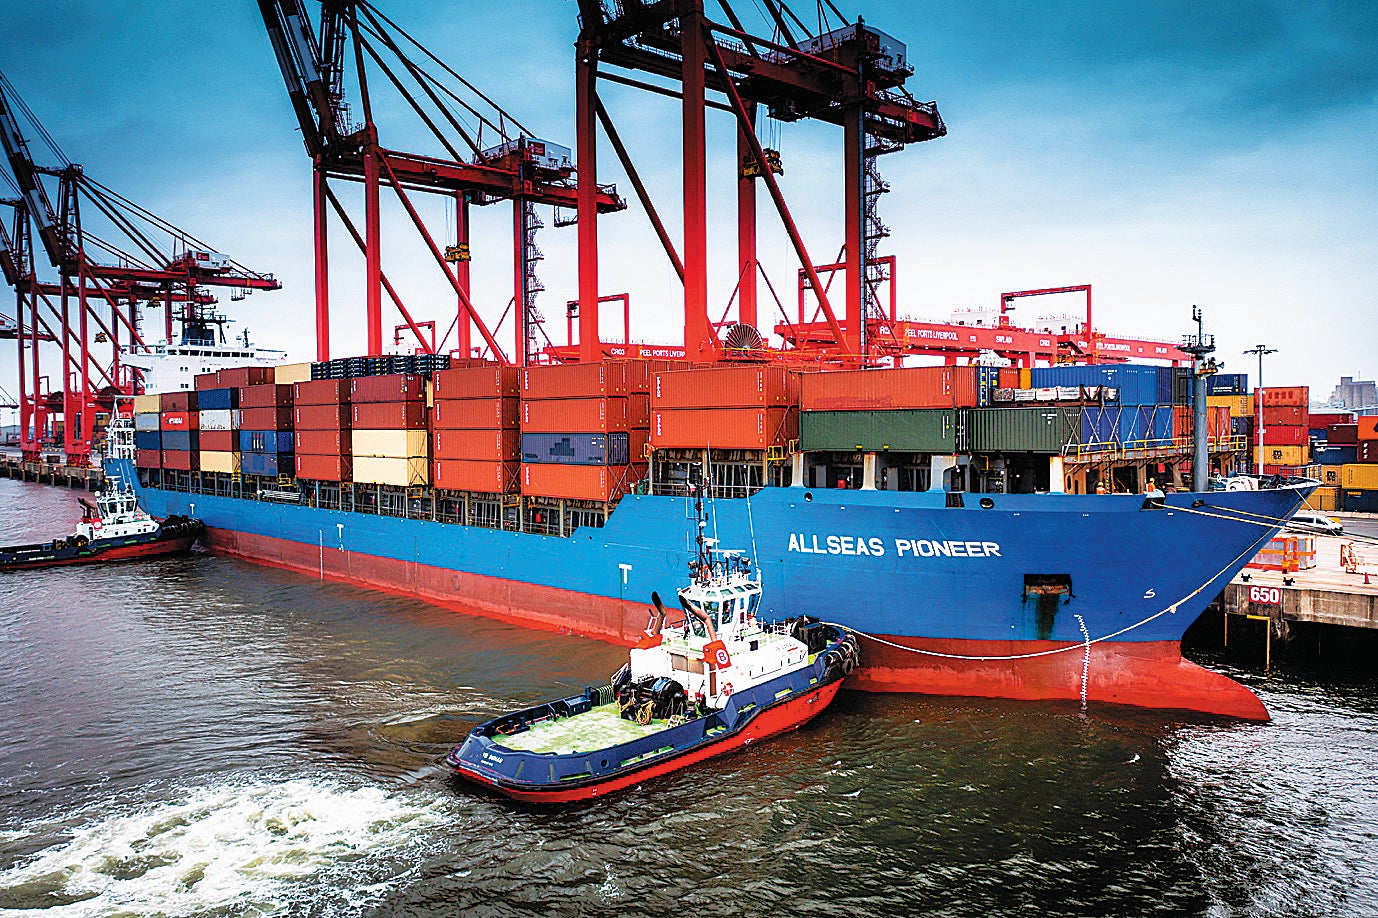 Allseas Pioneer, a container ship carrying 1,631 containers of Chinese goods, at dock in the Port of Liverpool on 6 May 2022